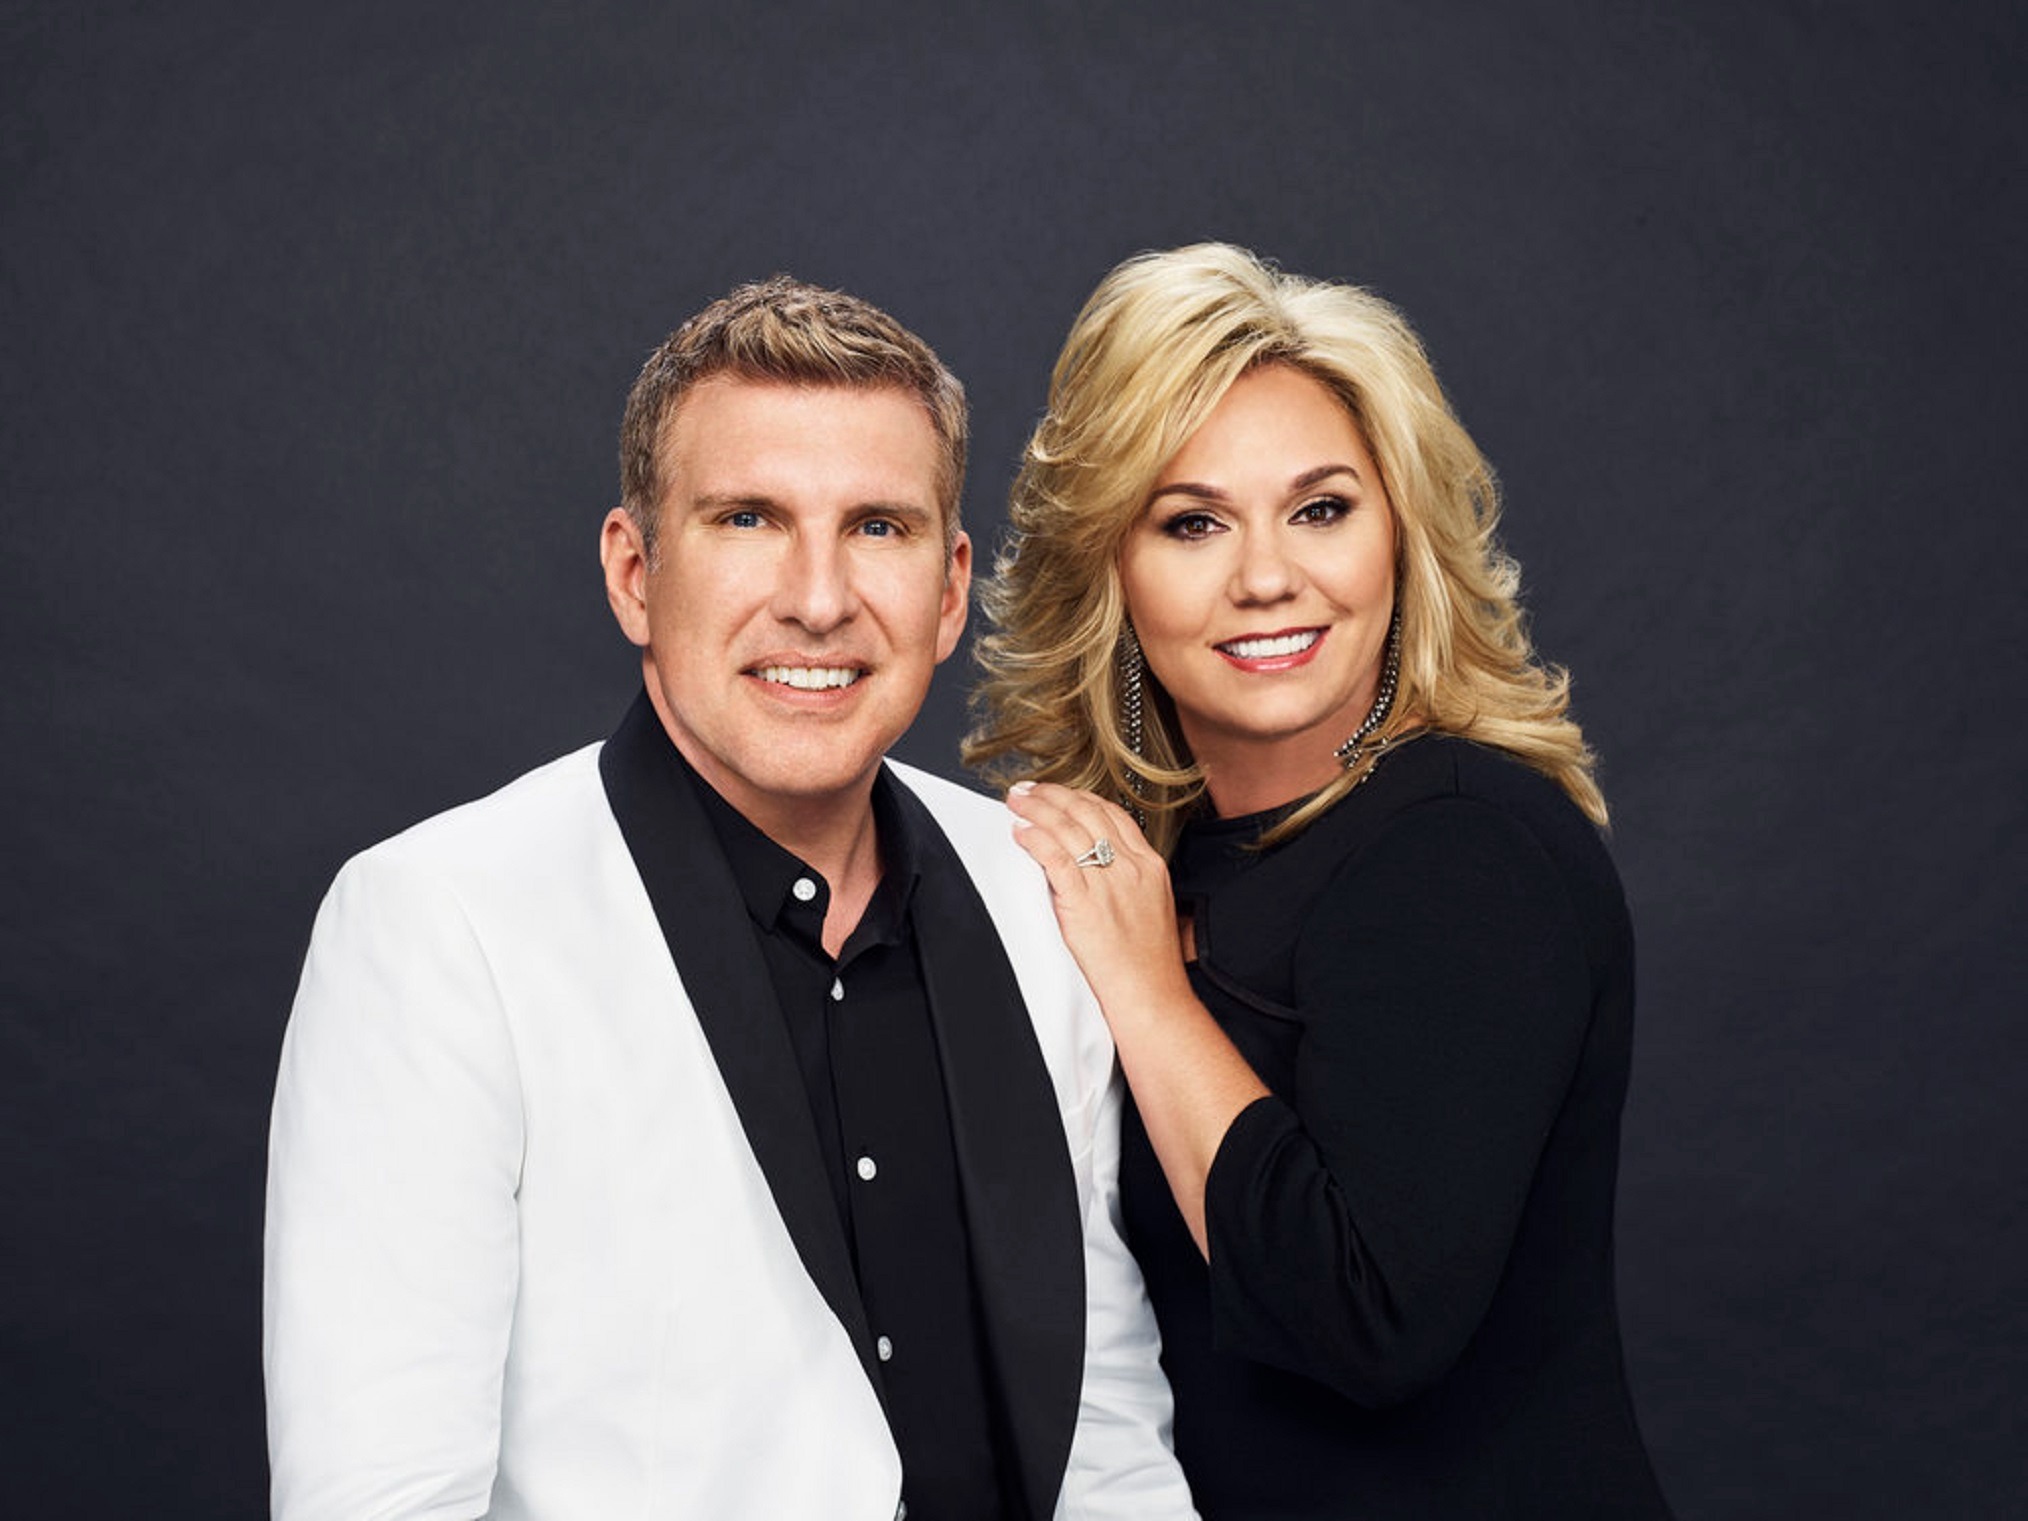 Todd Chrisley Asks for Prayer After 'Overwhelming' Gifts Are Sent After His Federal Conviction